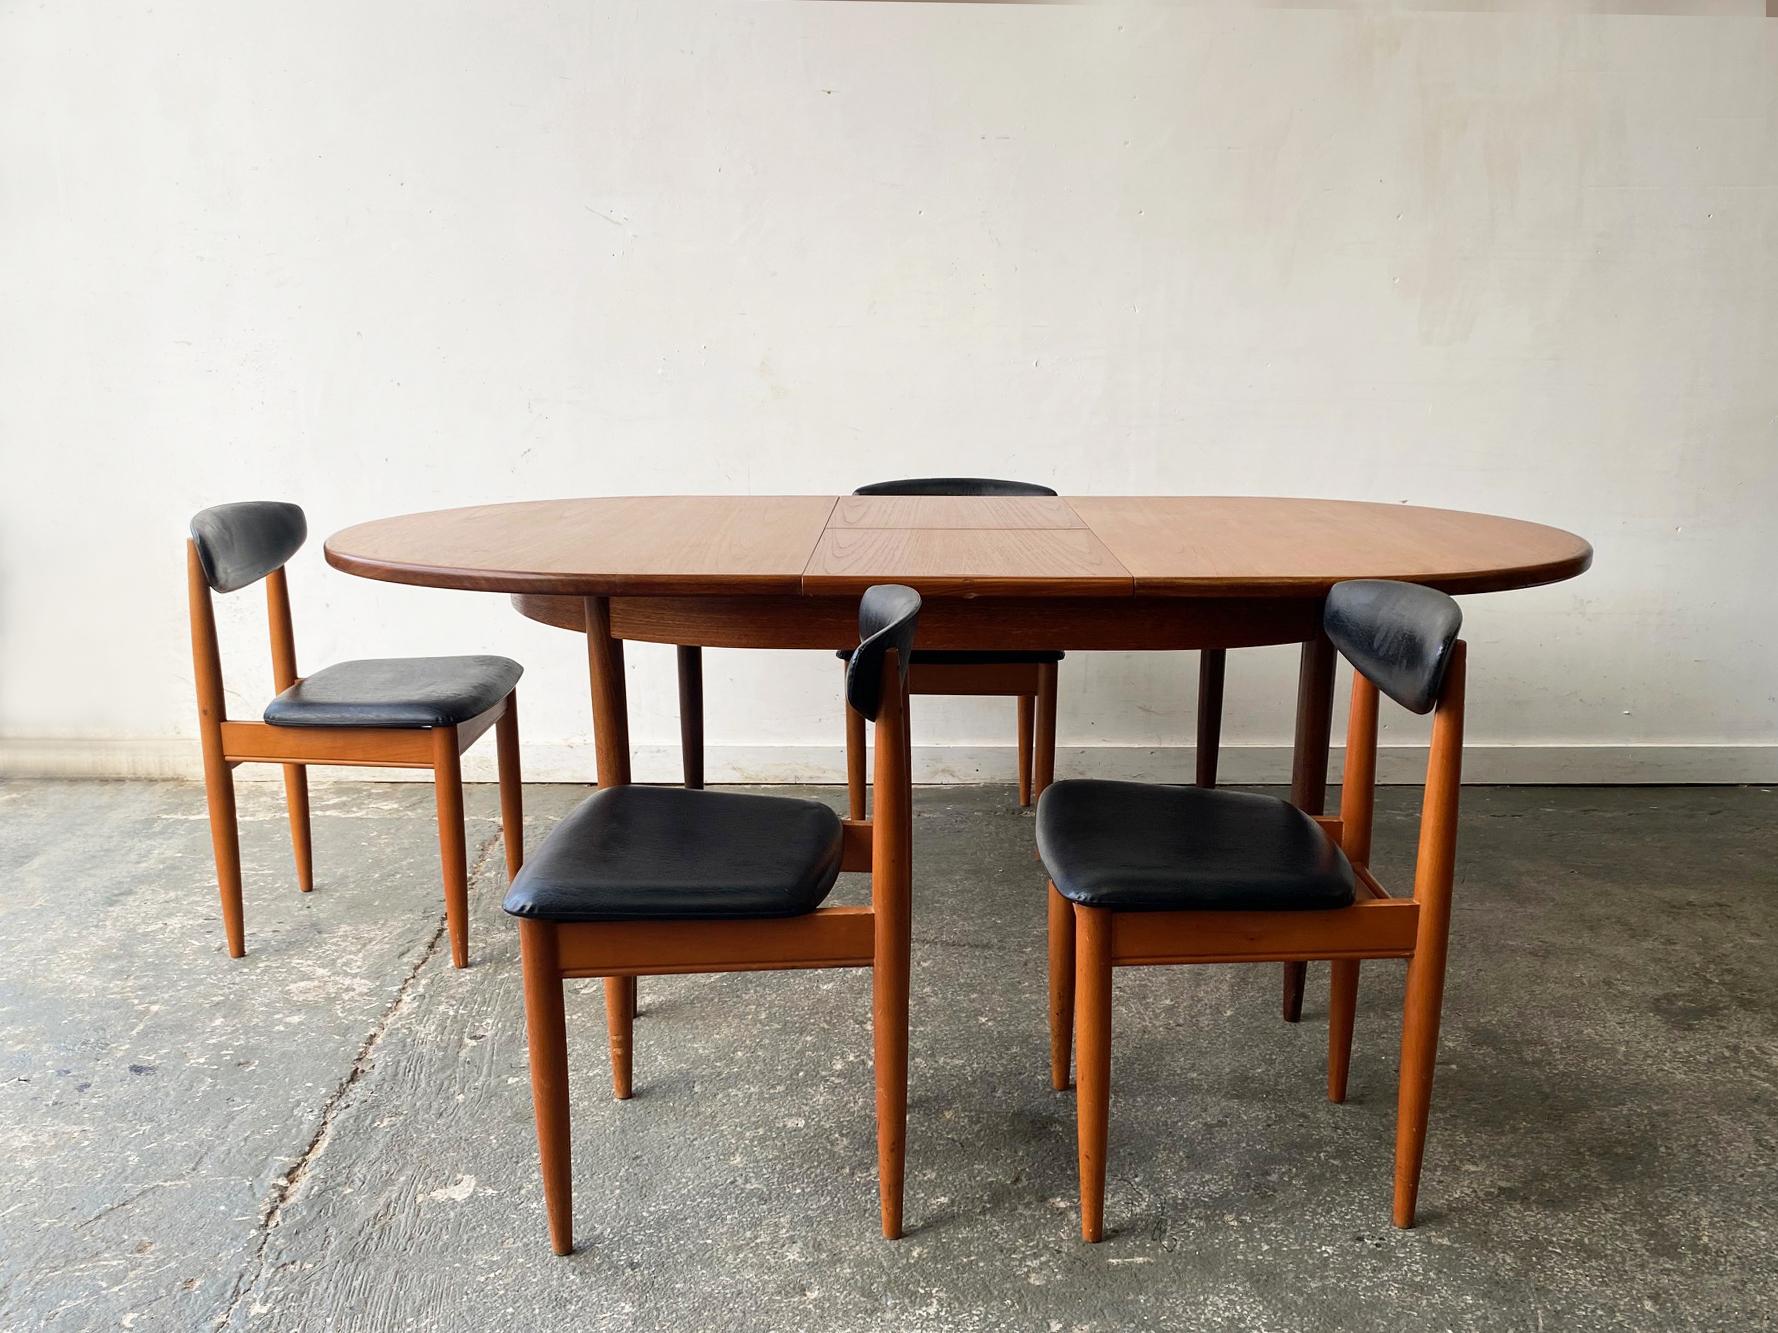 A mid century modern extending G Plan dining table, matched with 4 Schreiber Furniture dining chairs.

A classic G plan ‘Fresco table’ designed by Victor Wilkins. Designed in minimalist Danish style, with clean lines and gently tapering